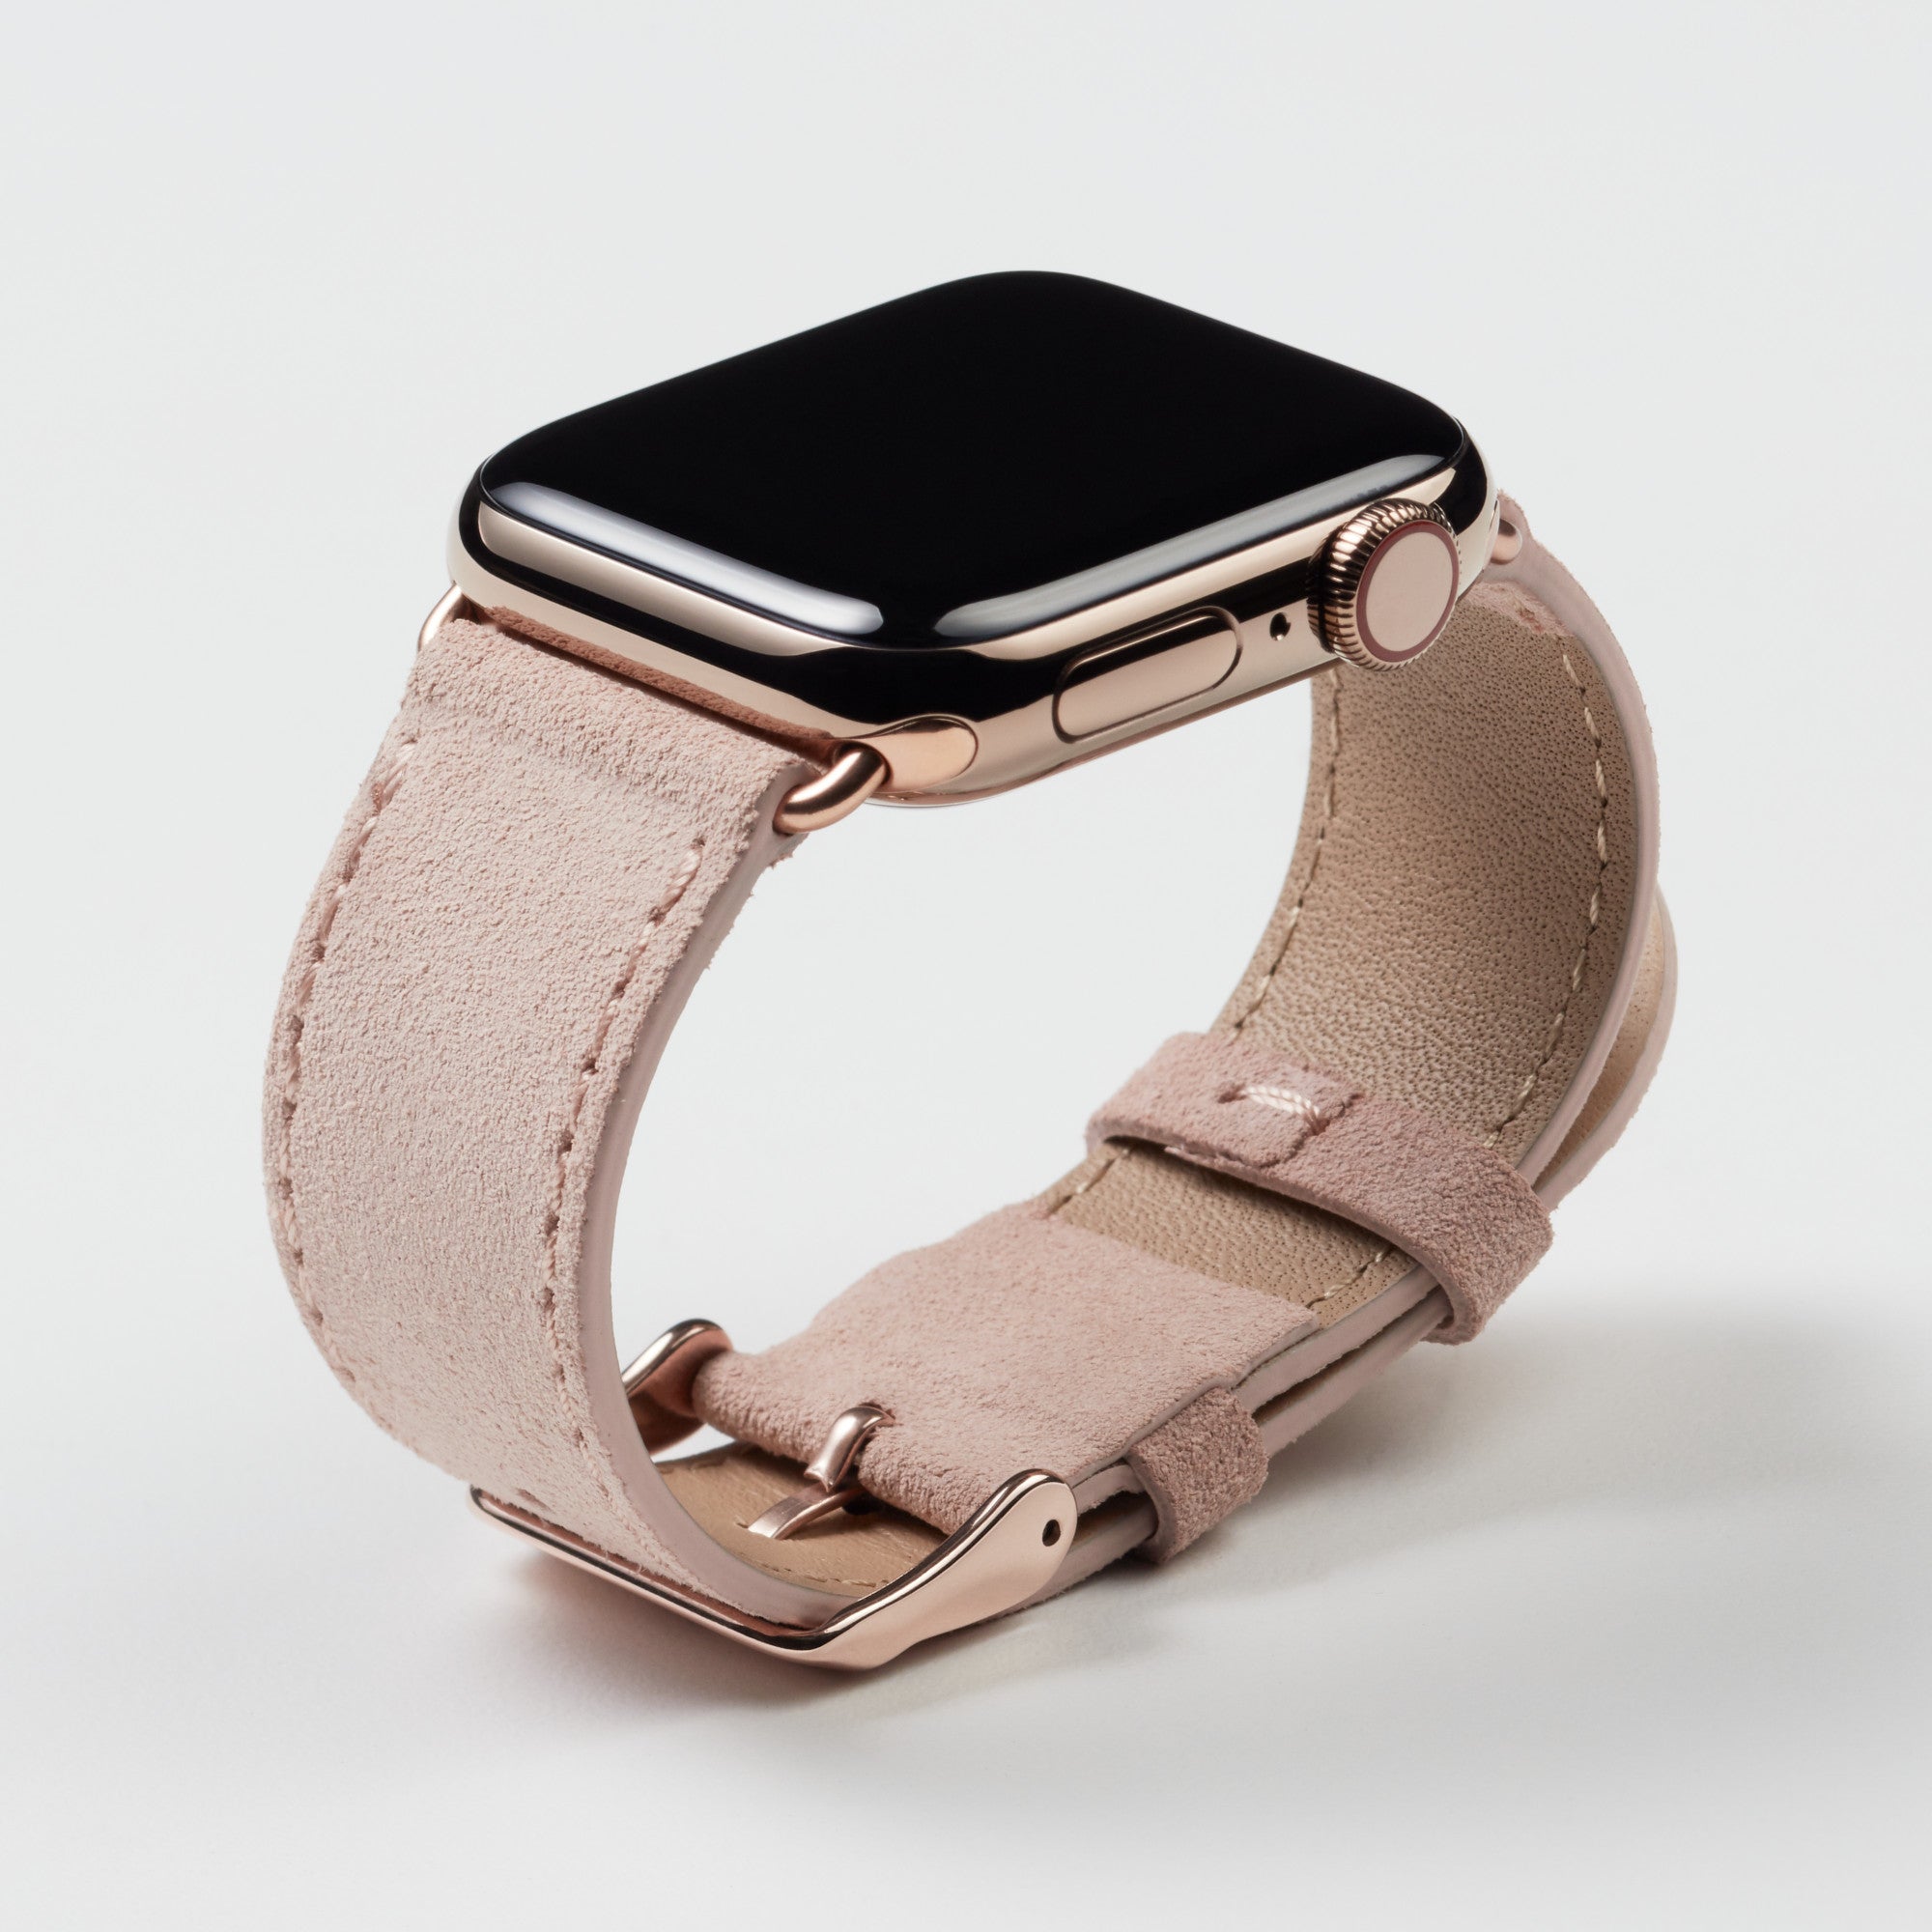 Pin and Buckle Apple Watch Bands - Velour - Suede Leather Apple Watch Band - Peach - Gold